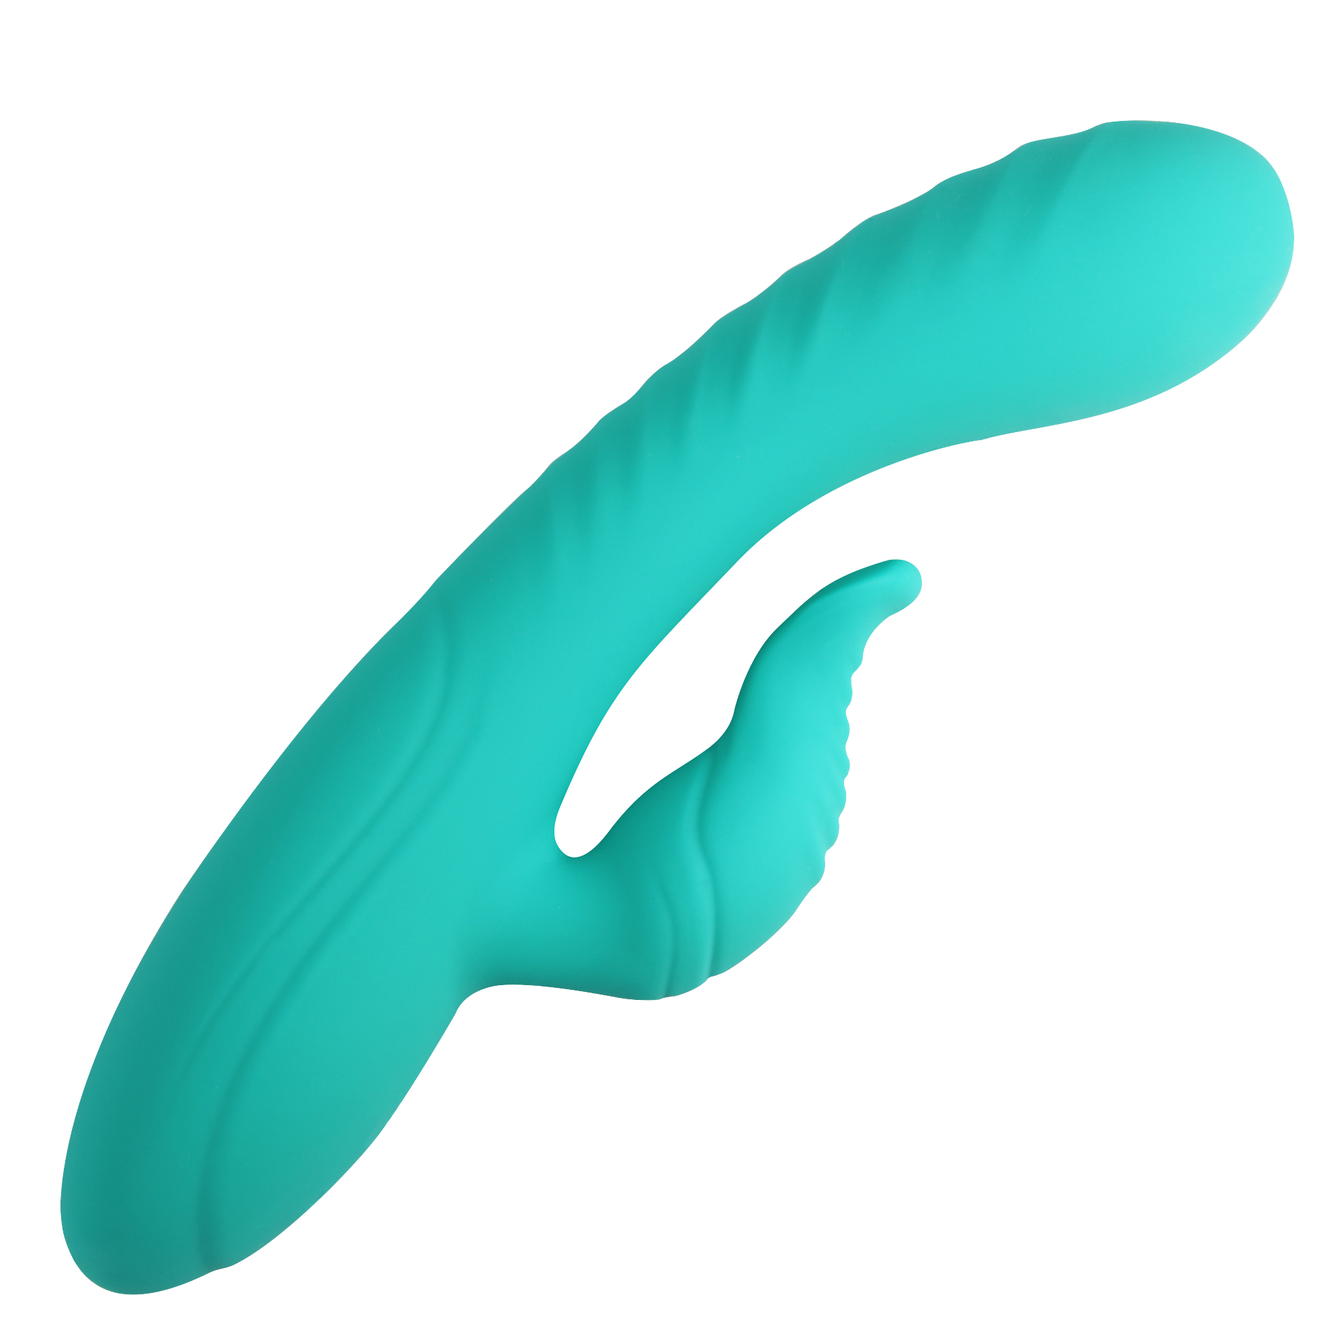 Teal vibrating dual stimulator with ridges for extra stimulation on the gspot